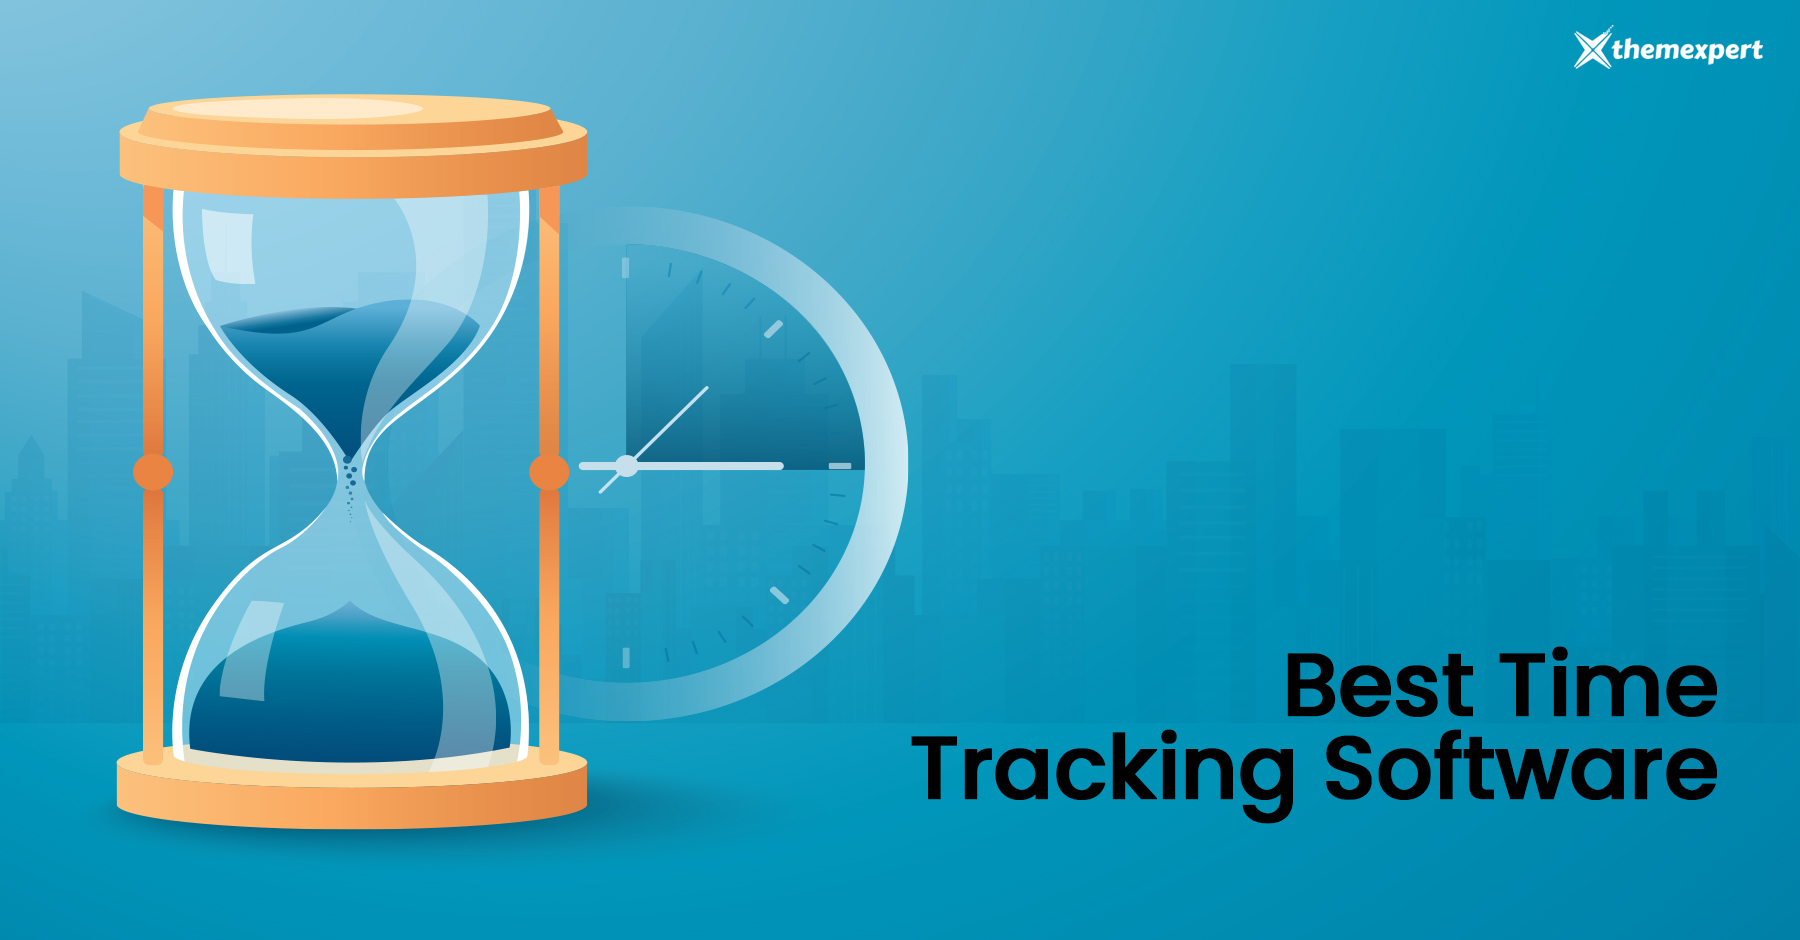 7 Best Time Tracking Software of 2022